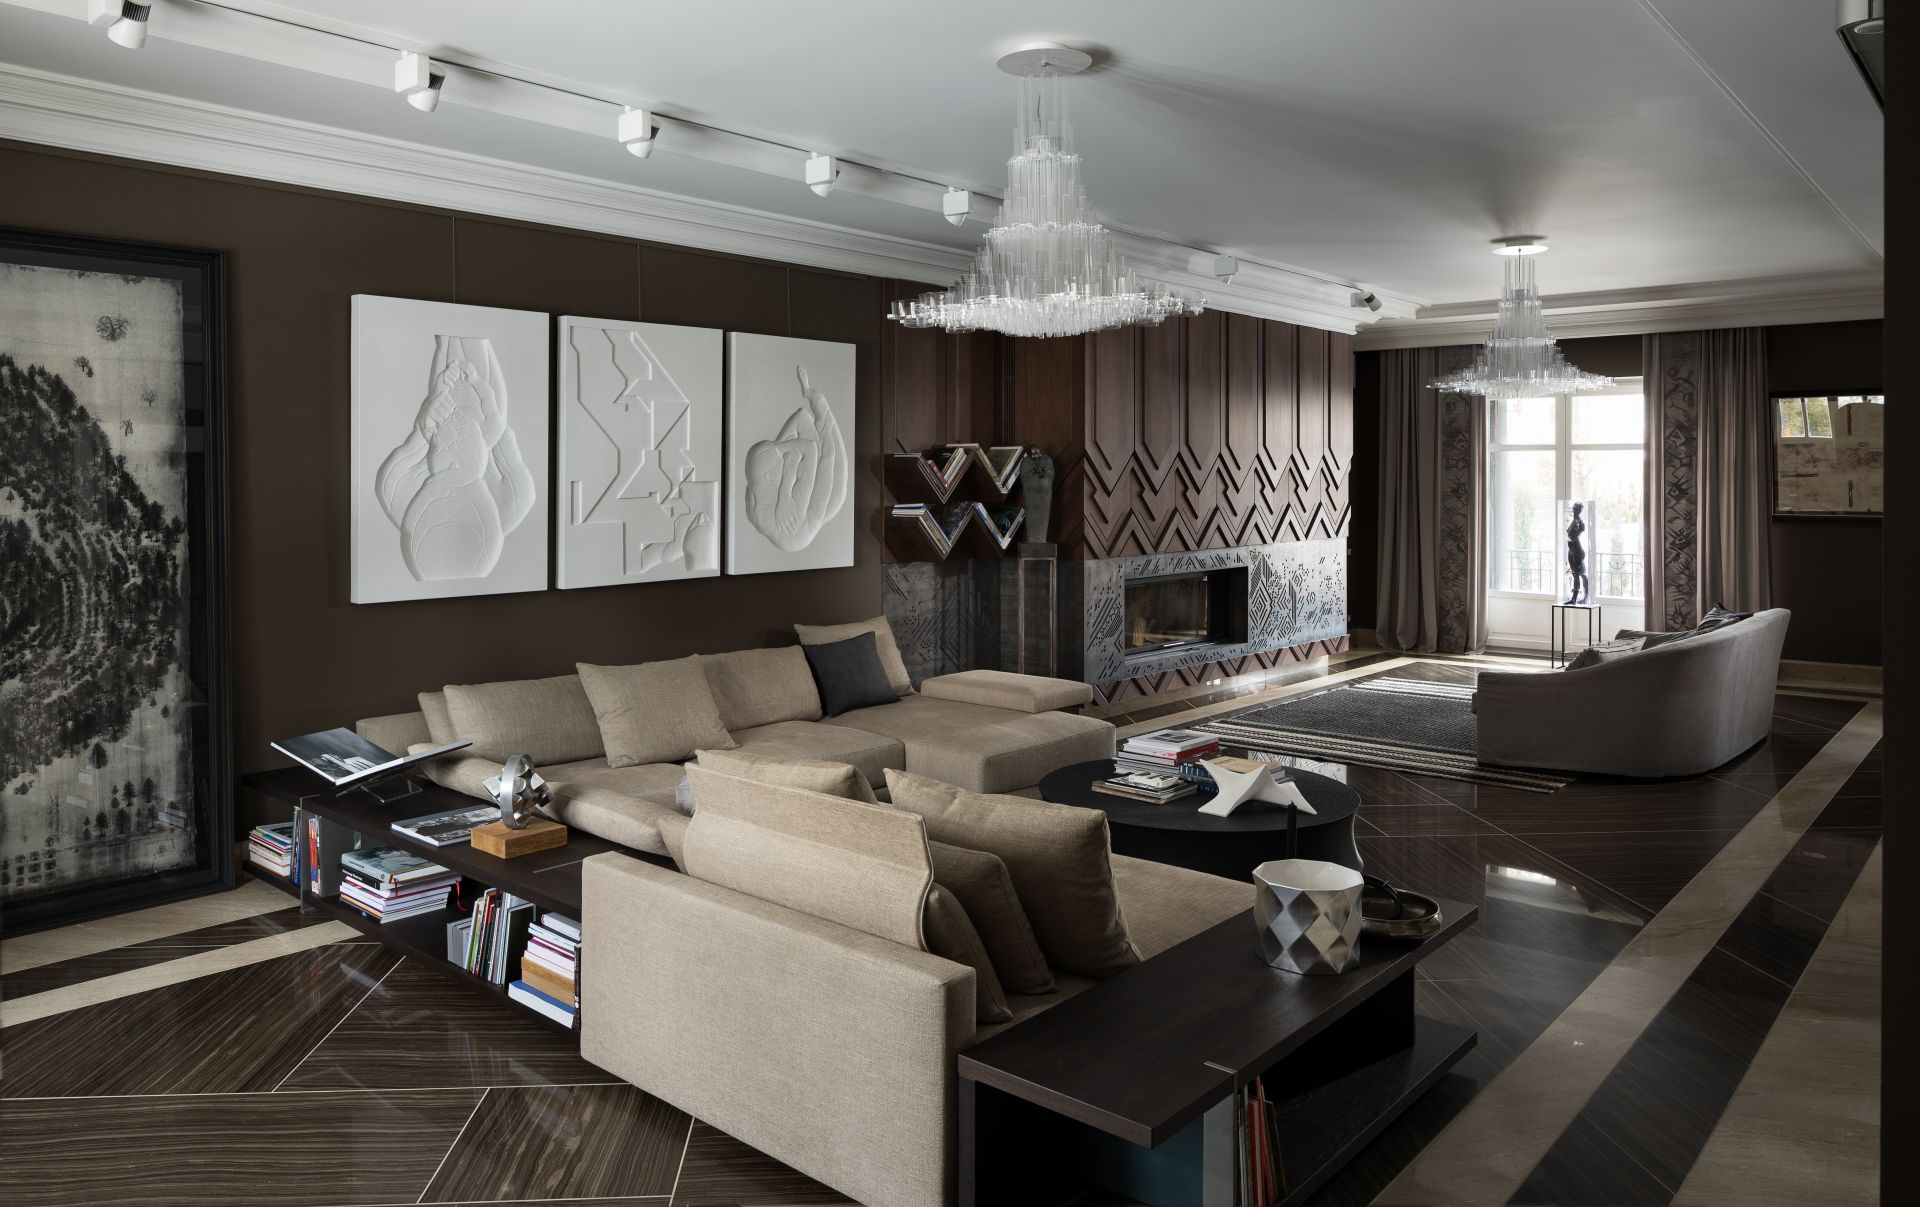 Wooden panels in a living room